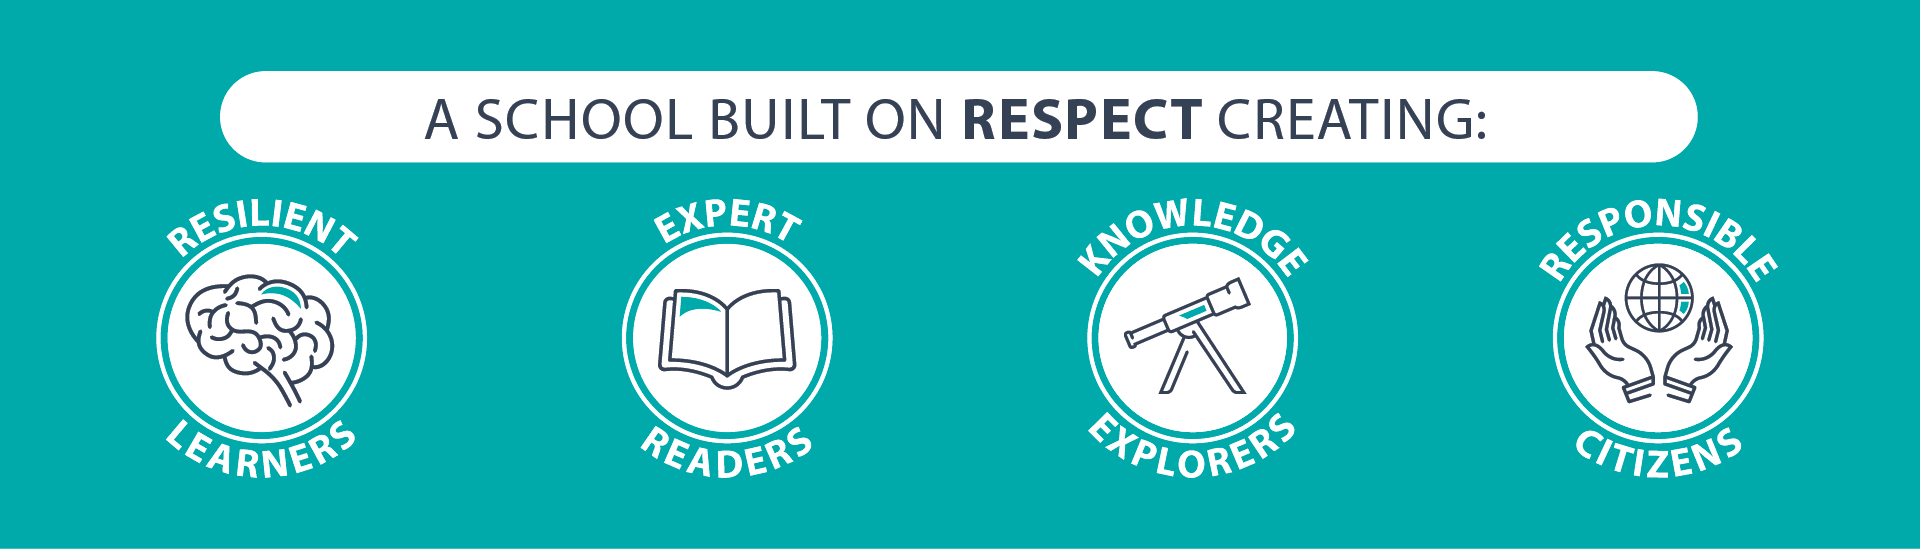 A school built on RESPECT creating: resilient learners, expert readers, knowledge explorers and responsible citizens